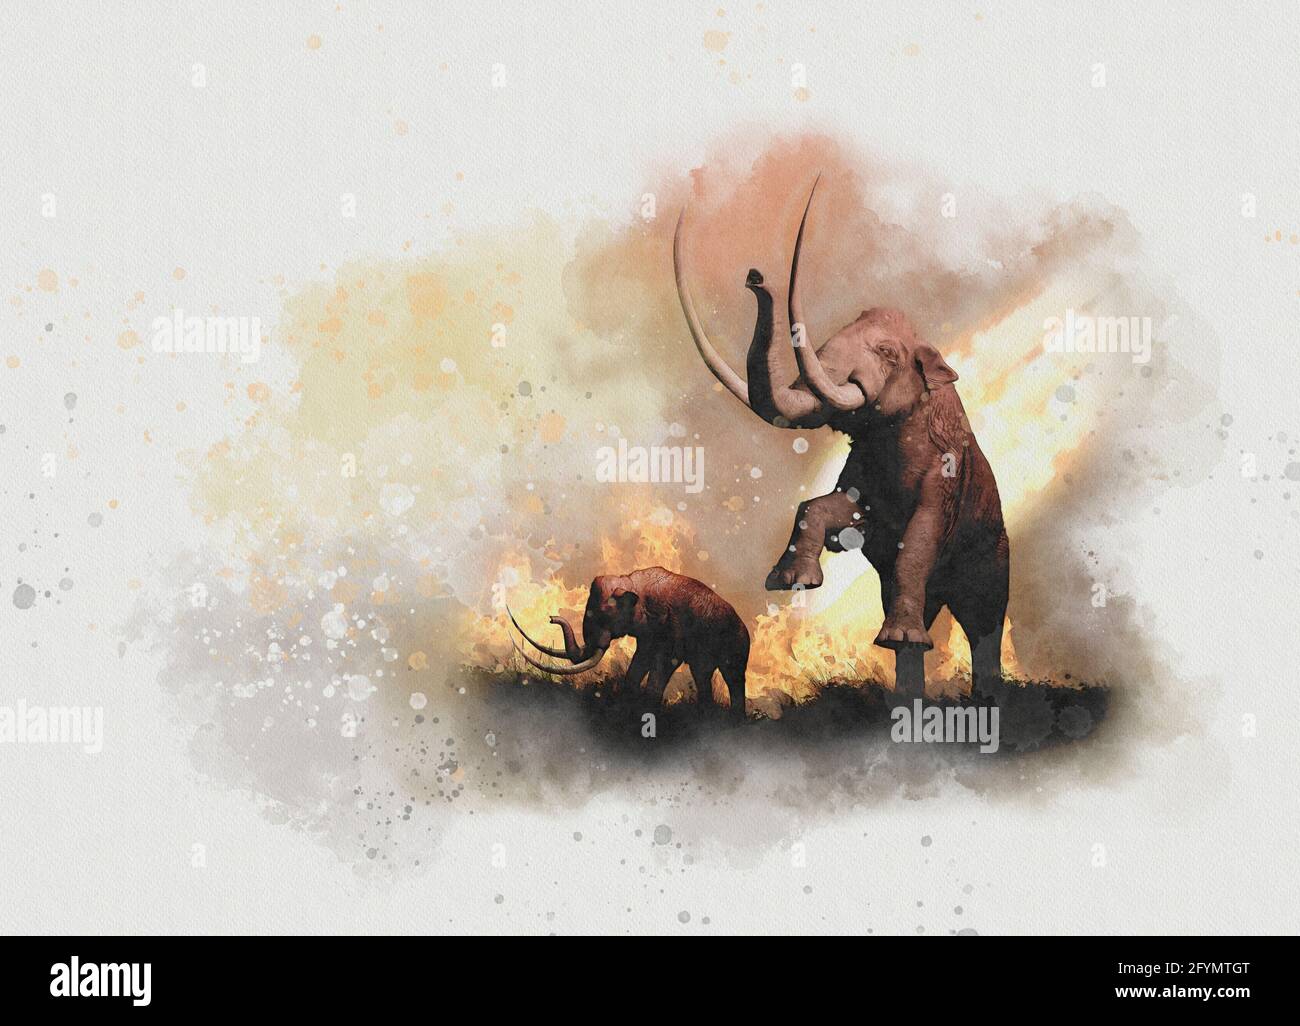 Woolly mammoths and meteor, illustration Stock Photo